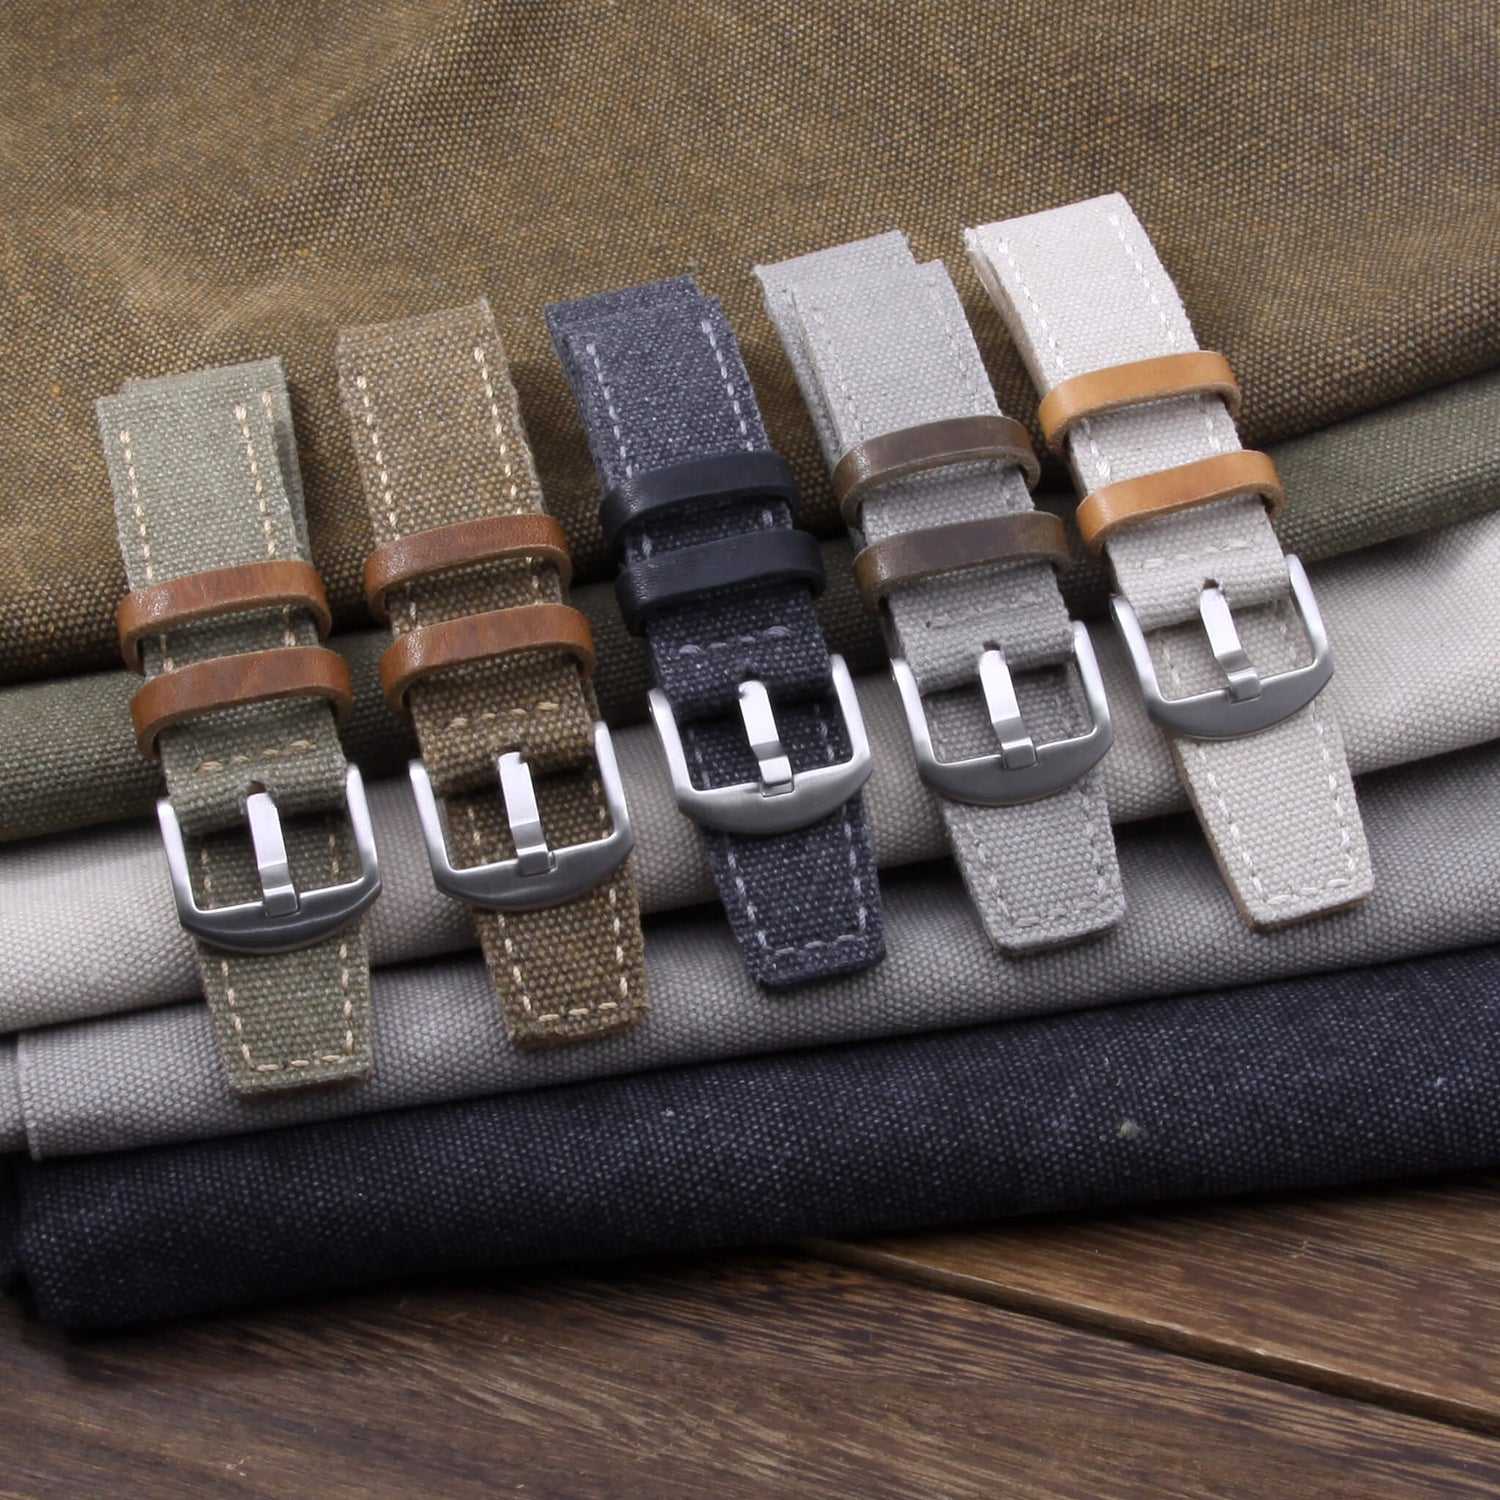 Our canvas watch straps are made with high-quality materials, making them the perfect choice for a variety of watches